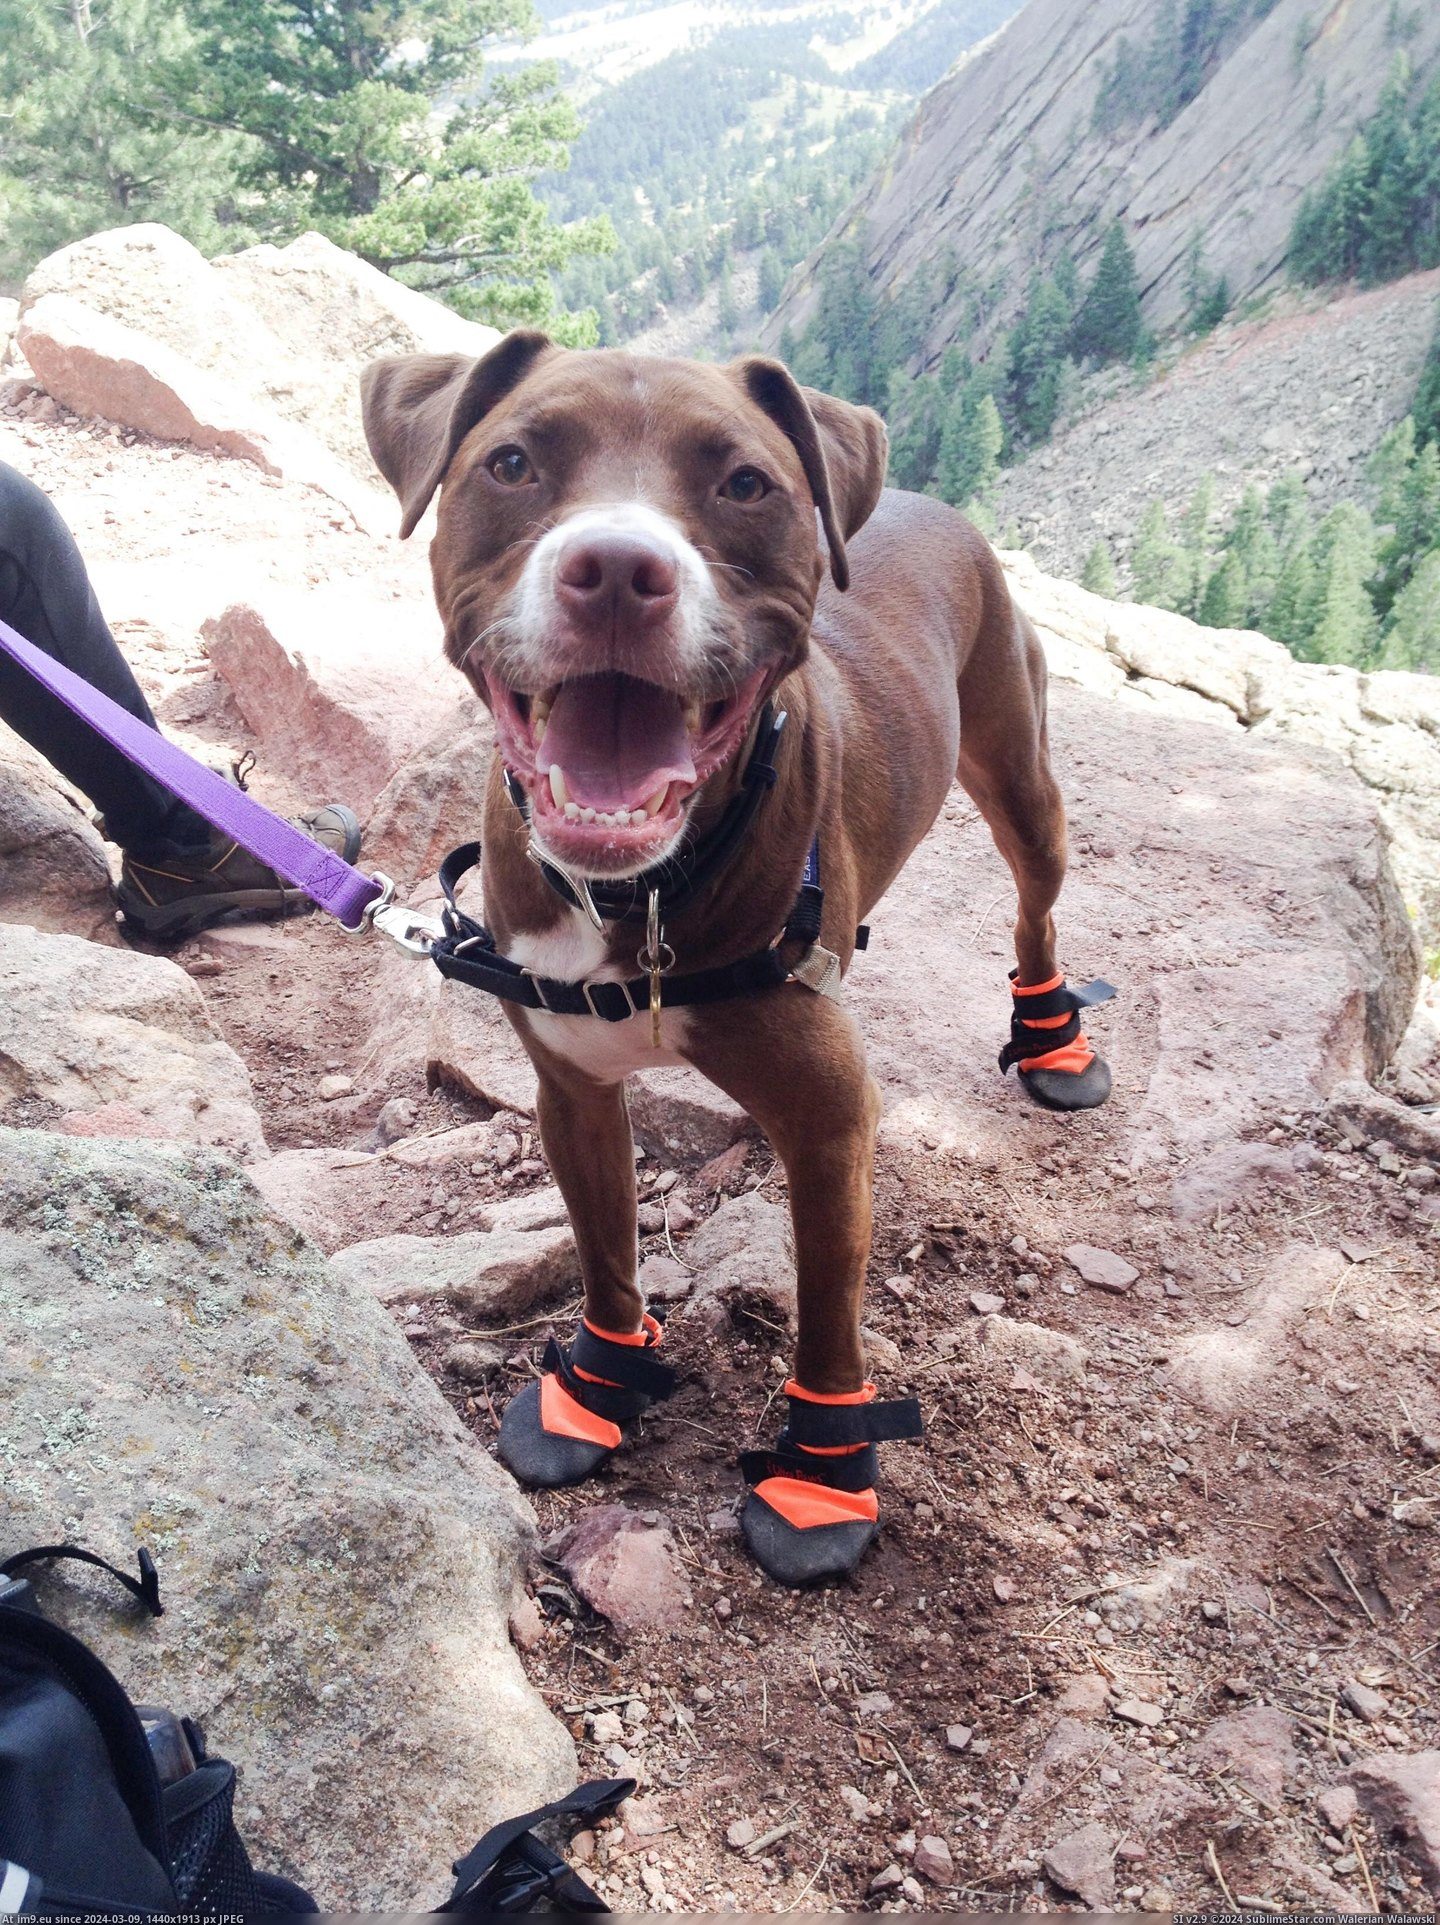 #Dog #Popular #Wore #Boots #Trail [Aww] He wore his new boots today and was the most popular dog on the trail! Pic. (Bild von album My r/AWW favs))